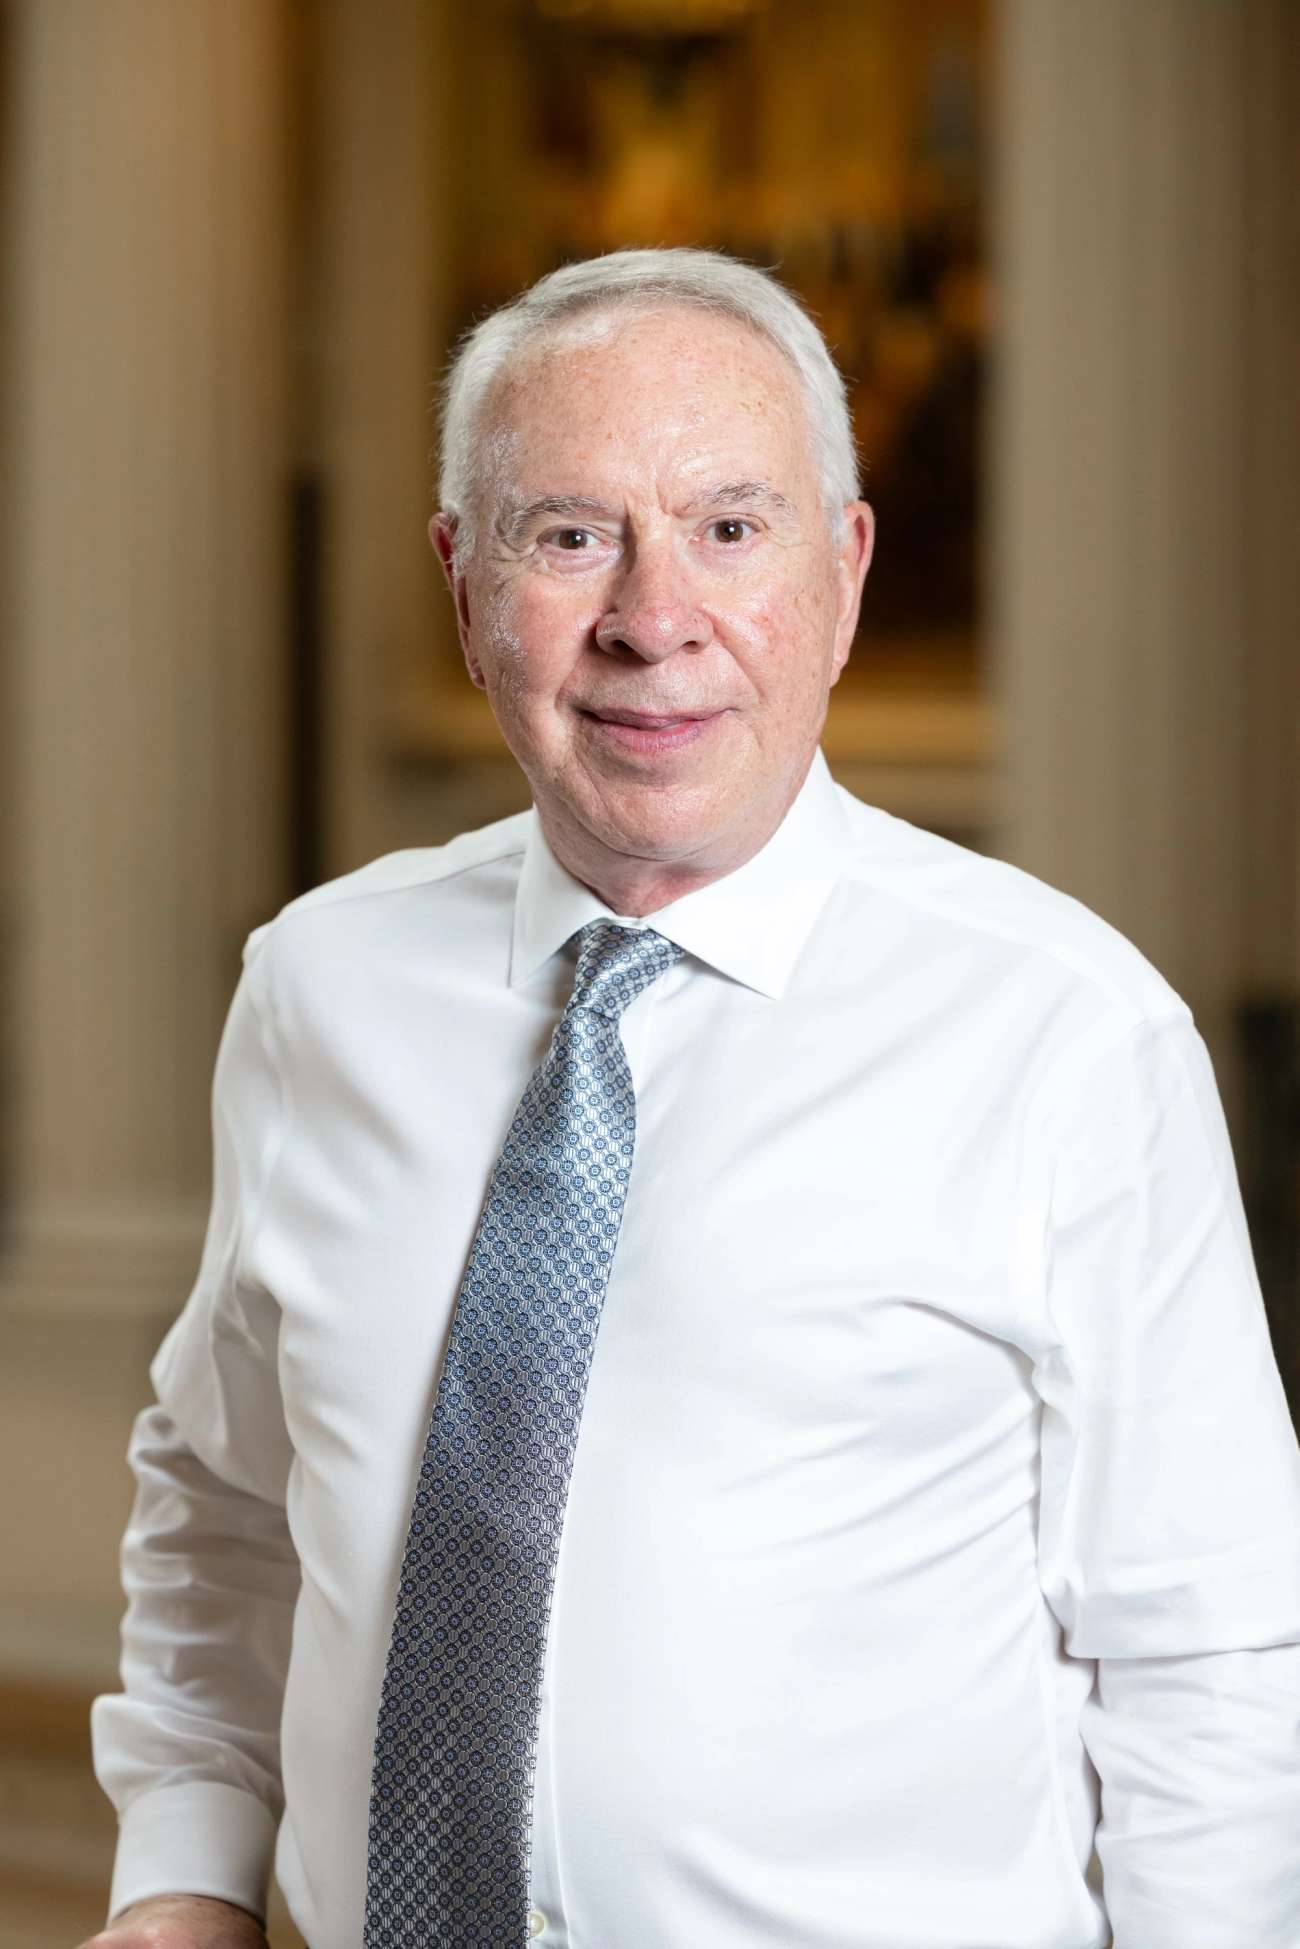 White male with short grey hair in white shirt and tie looking in camera